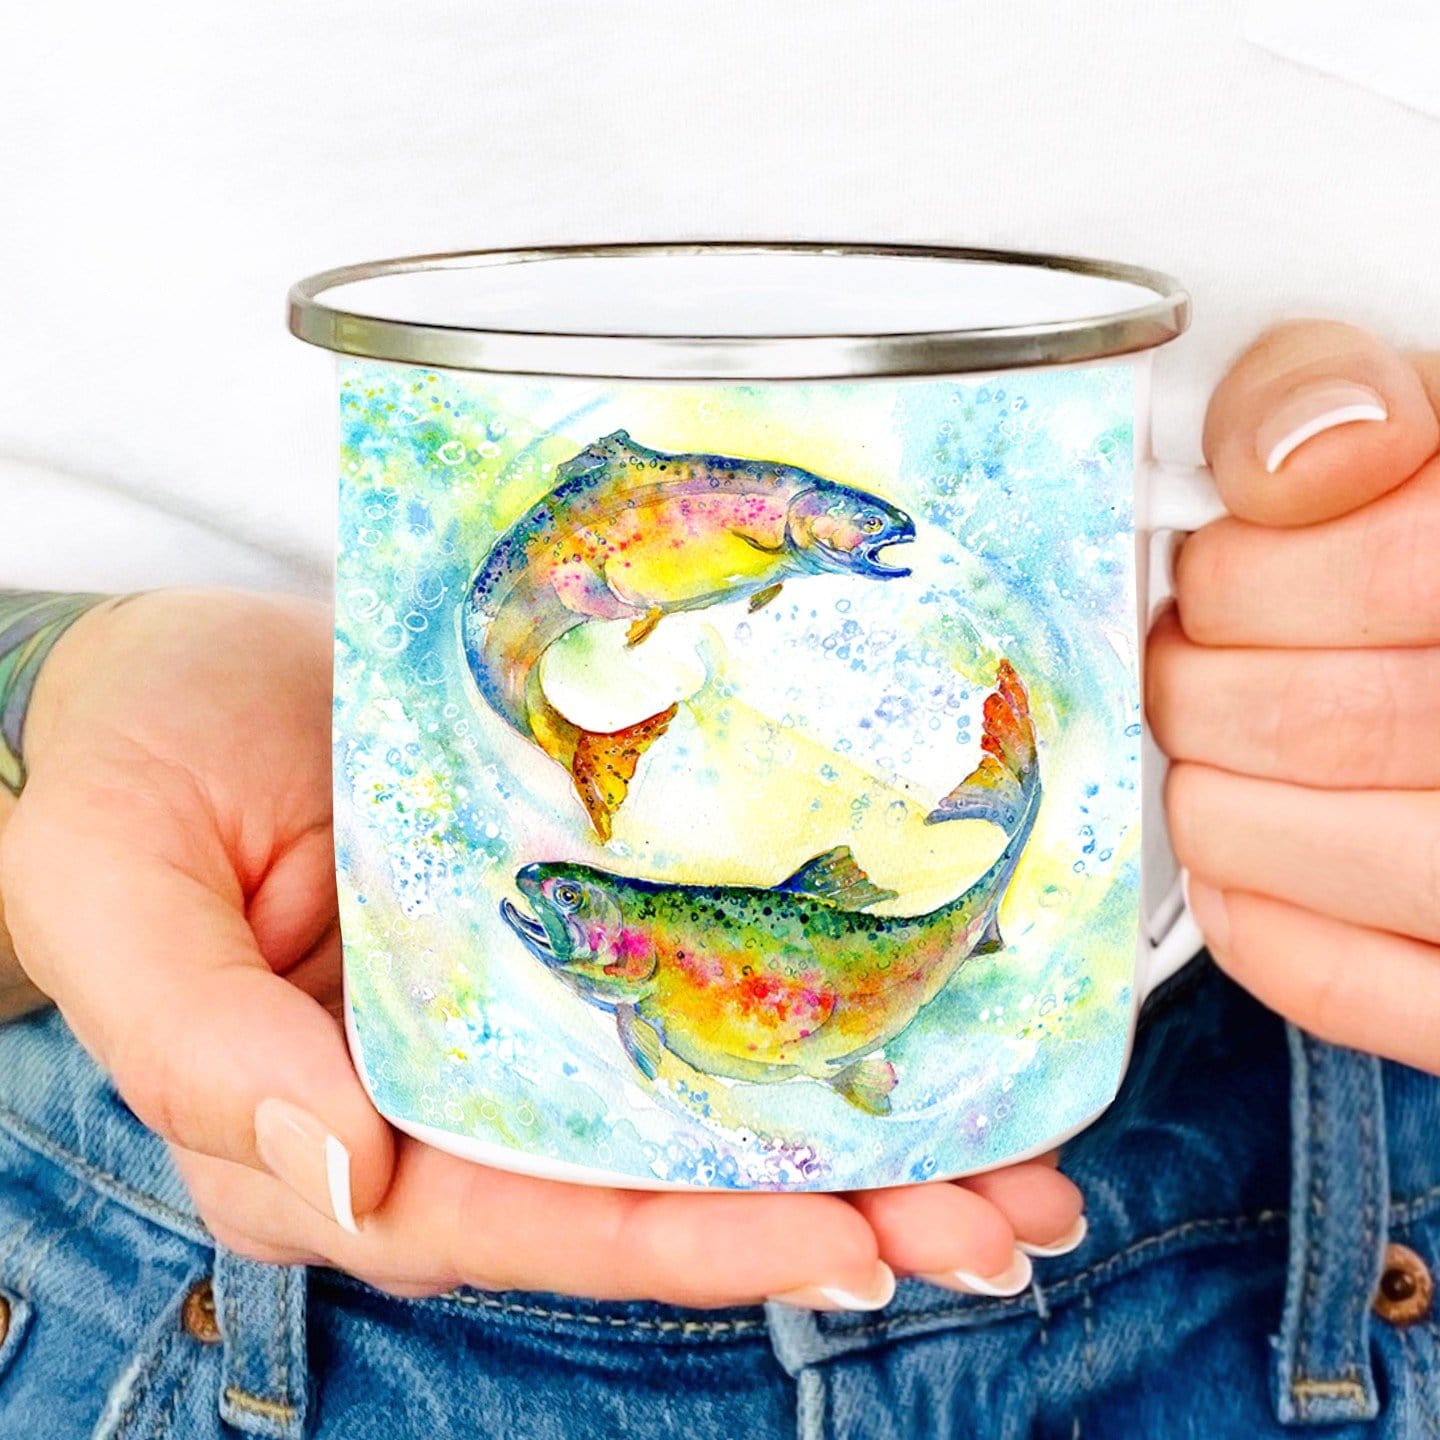 Fish Enamel Tin Mug Watercolour Trout Painted designed by artist Sheila Gill
